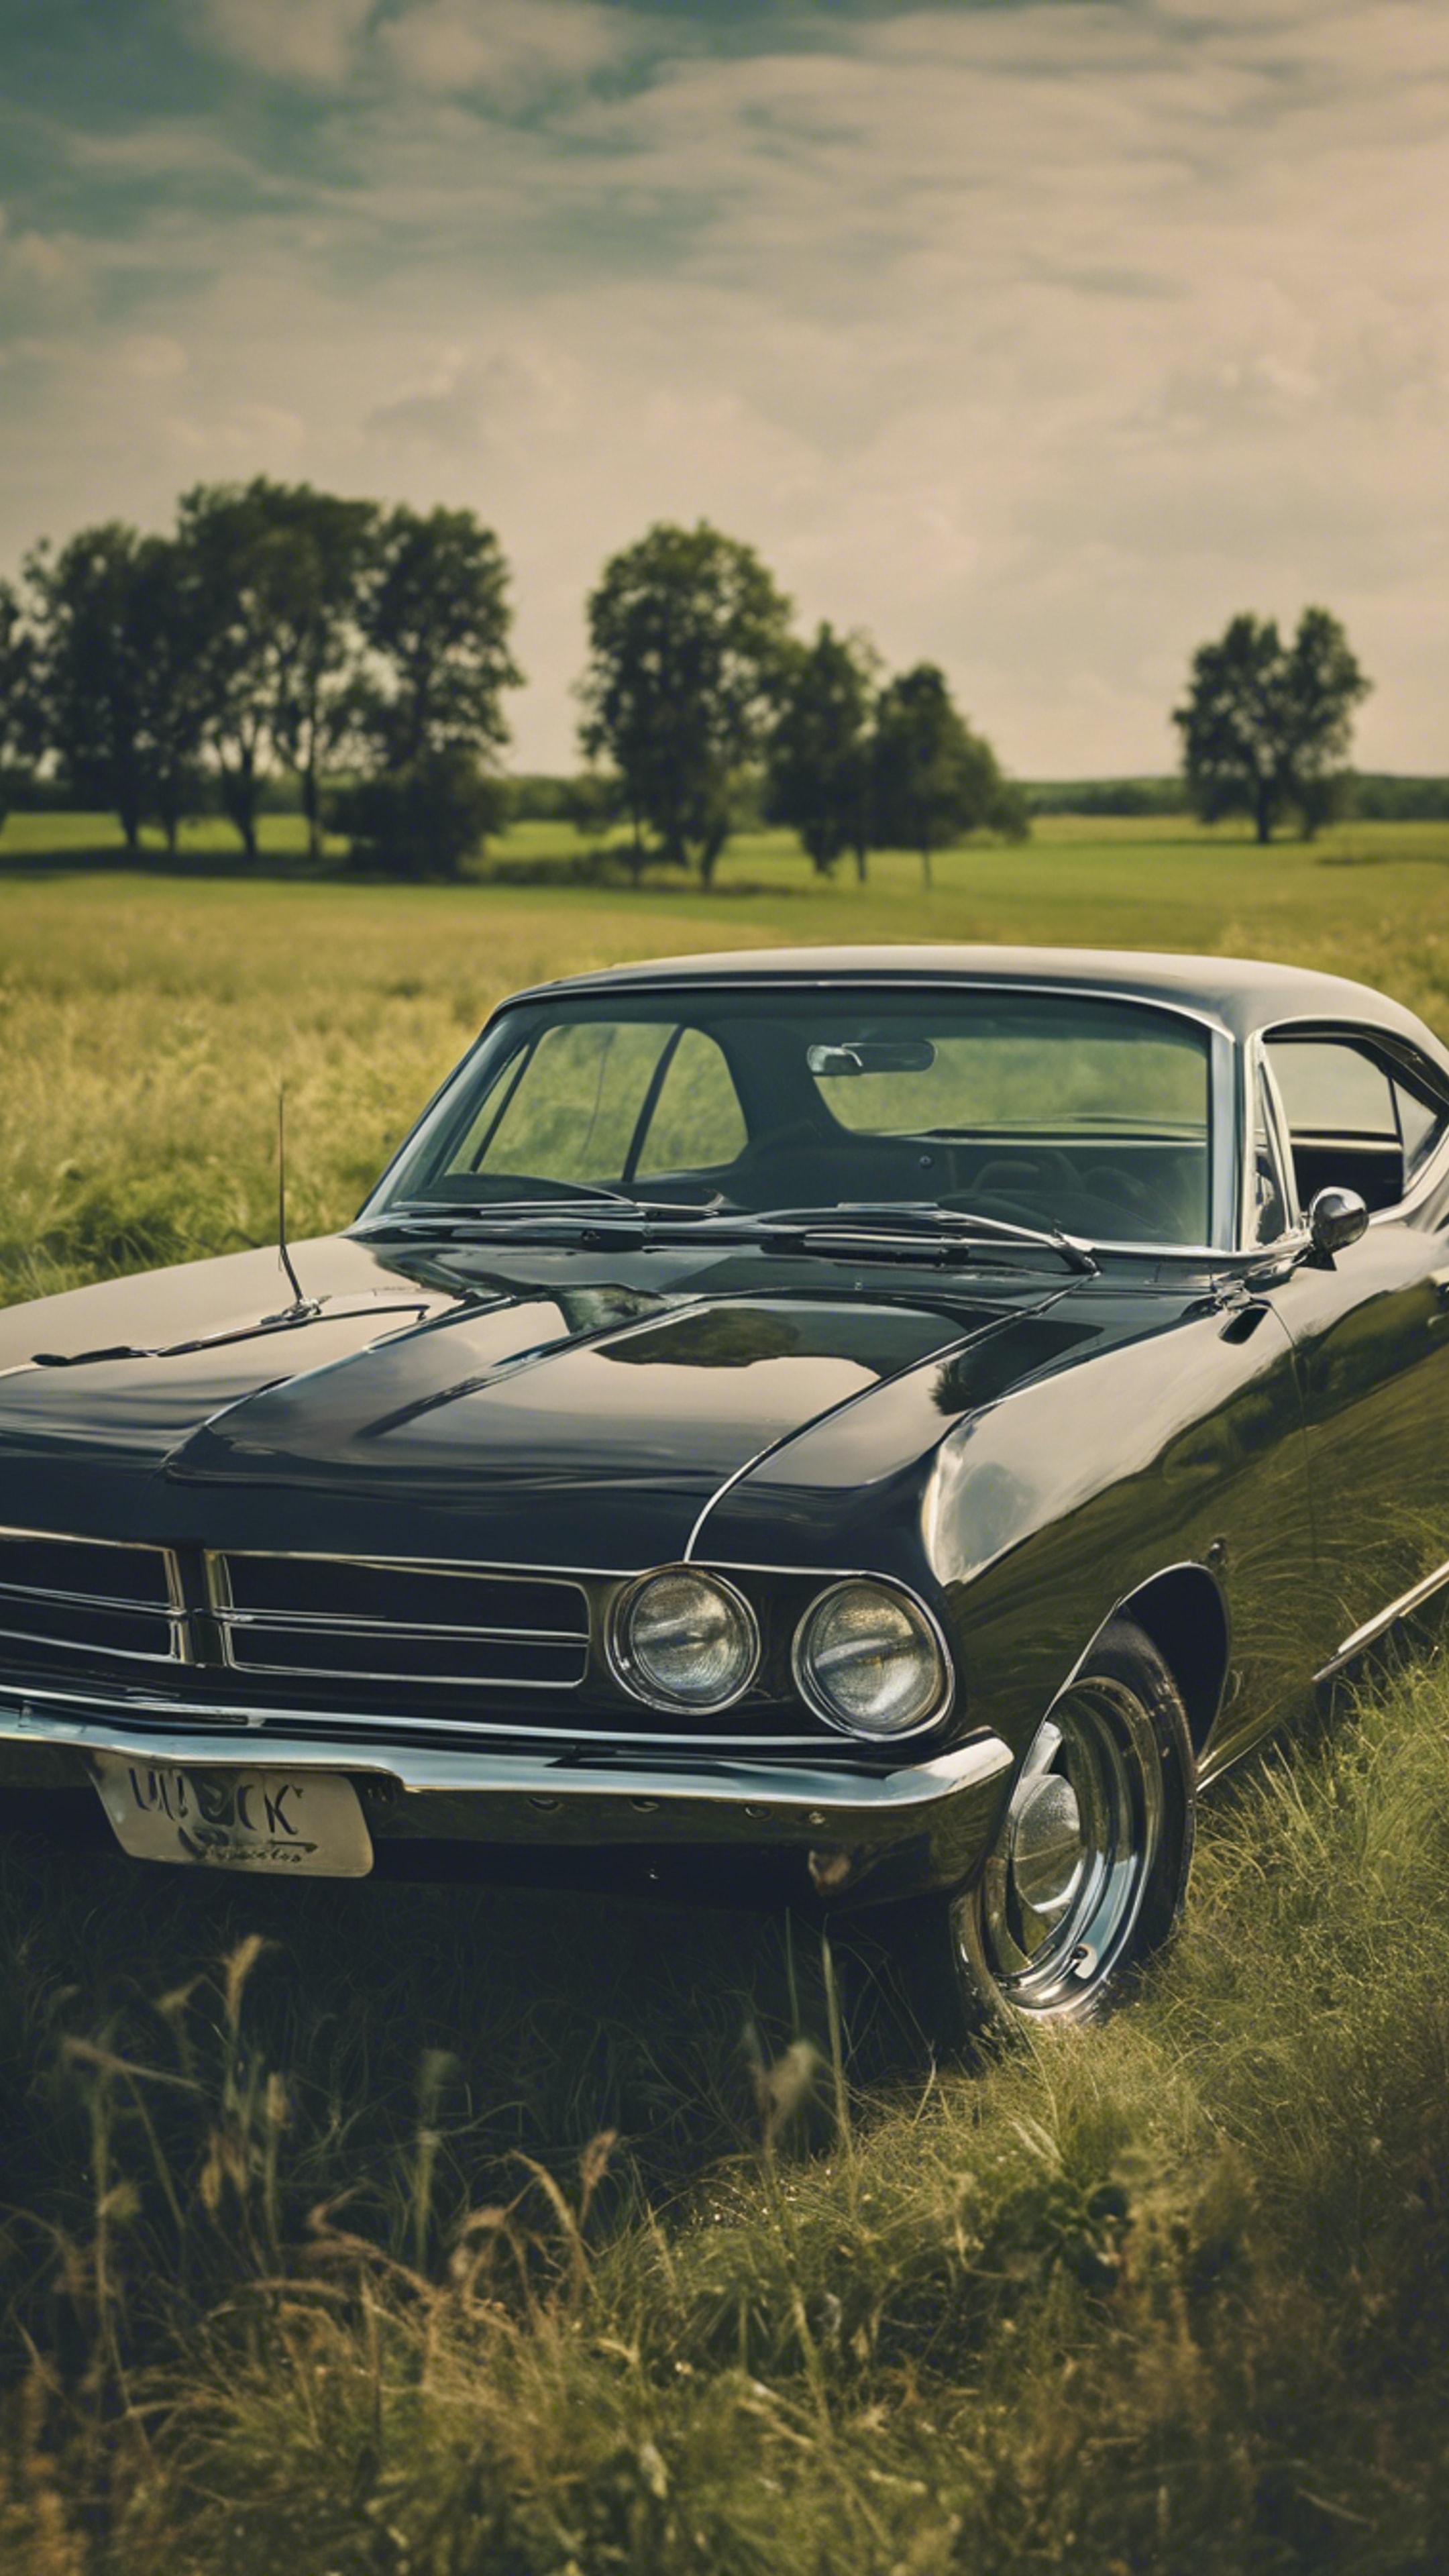 A classic 1960s black muscle car parked on a green countryside grassland. Wallpaper[1dbc21082bff44888358]